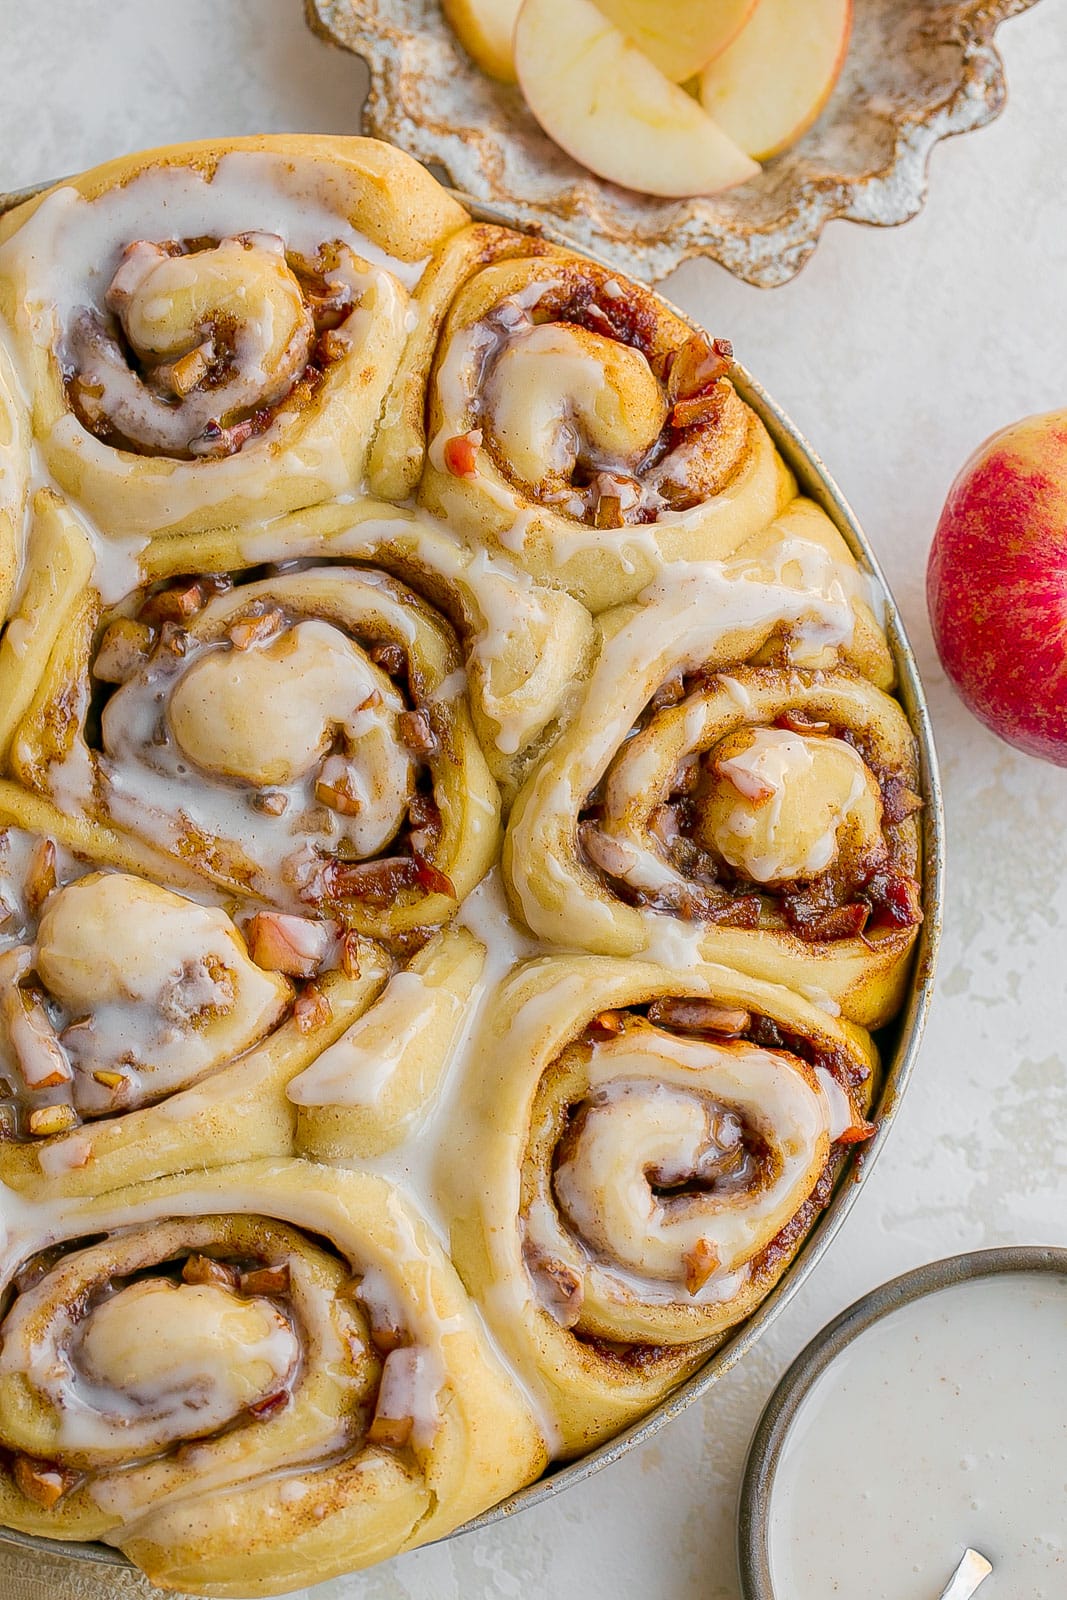 Cinnamon rolls with apple pie filling with icing. 